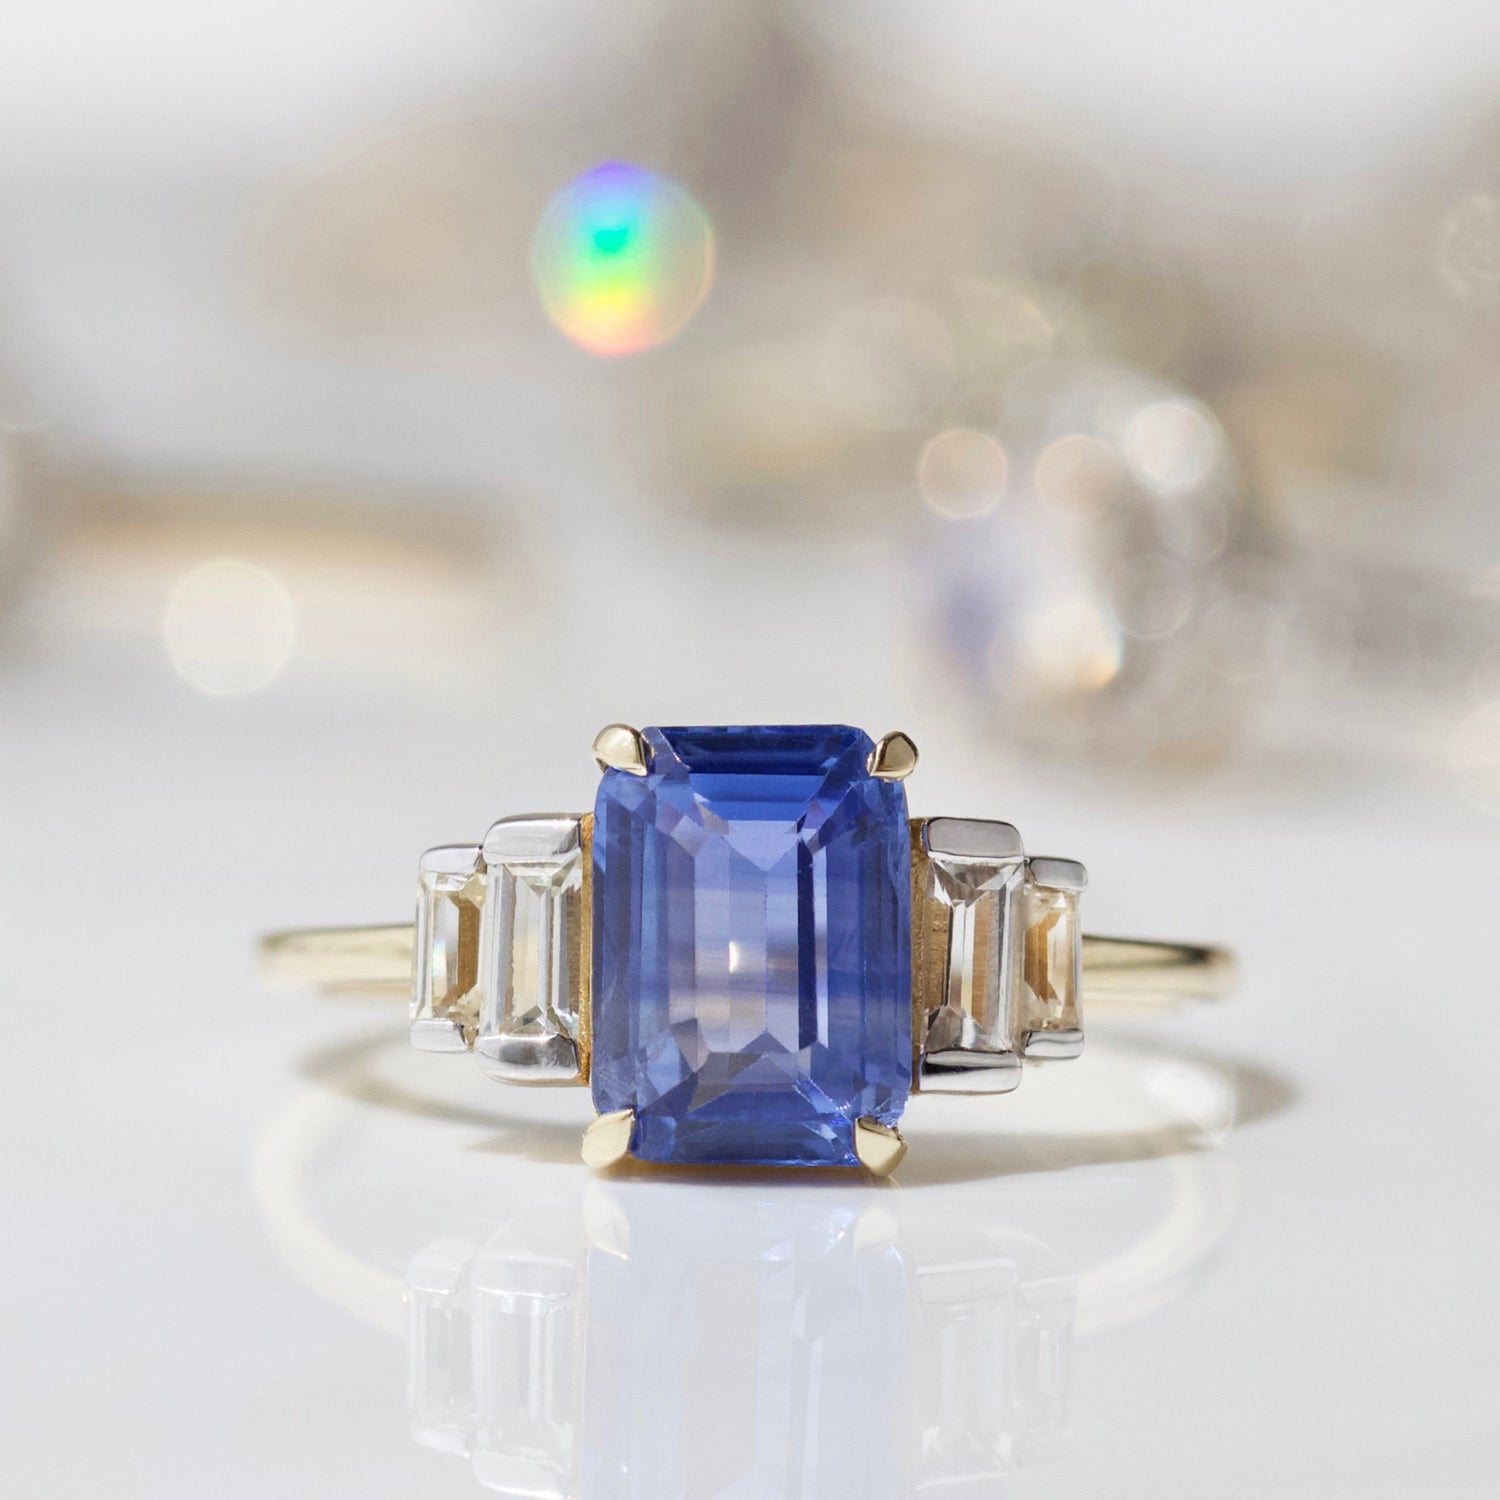 Blue and White sapphire engagement ring in solid gold